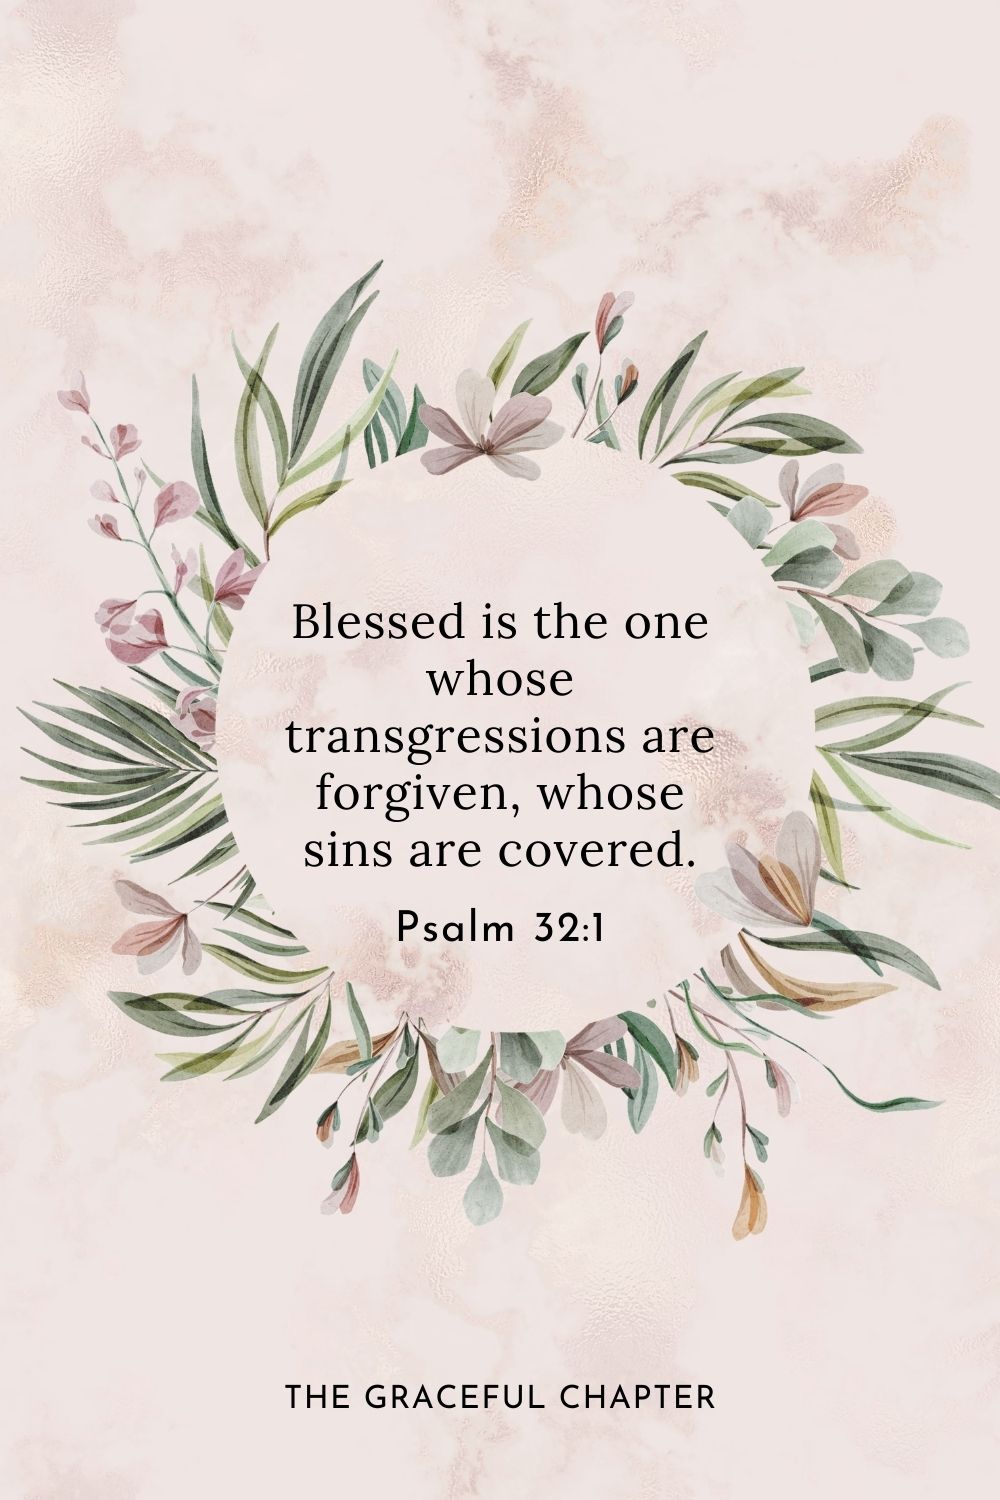 Blessed is the one whose transgressions are forgiven, whose sins are covered. Psalm 32:1